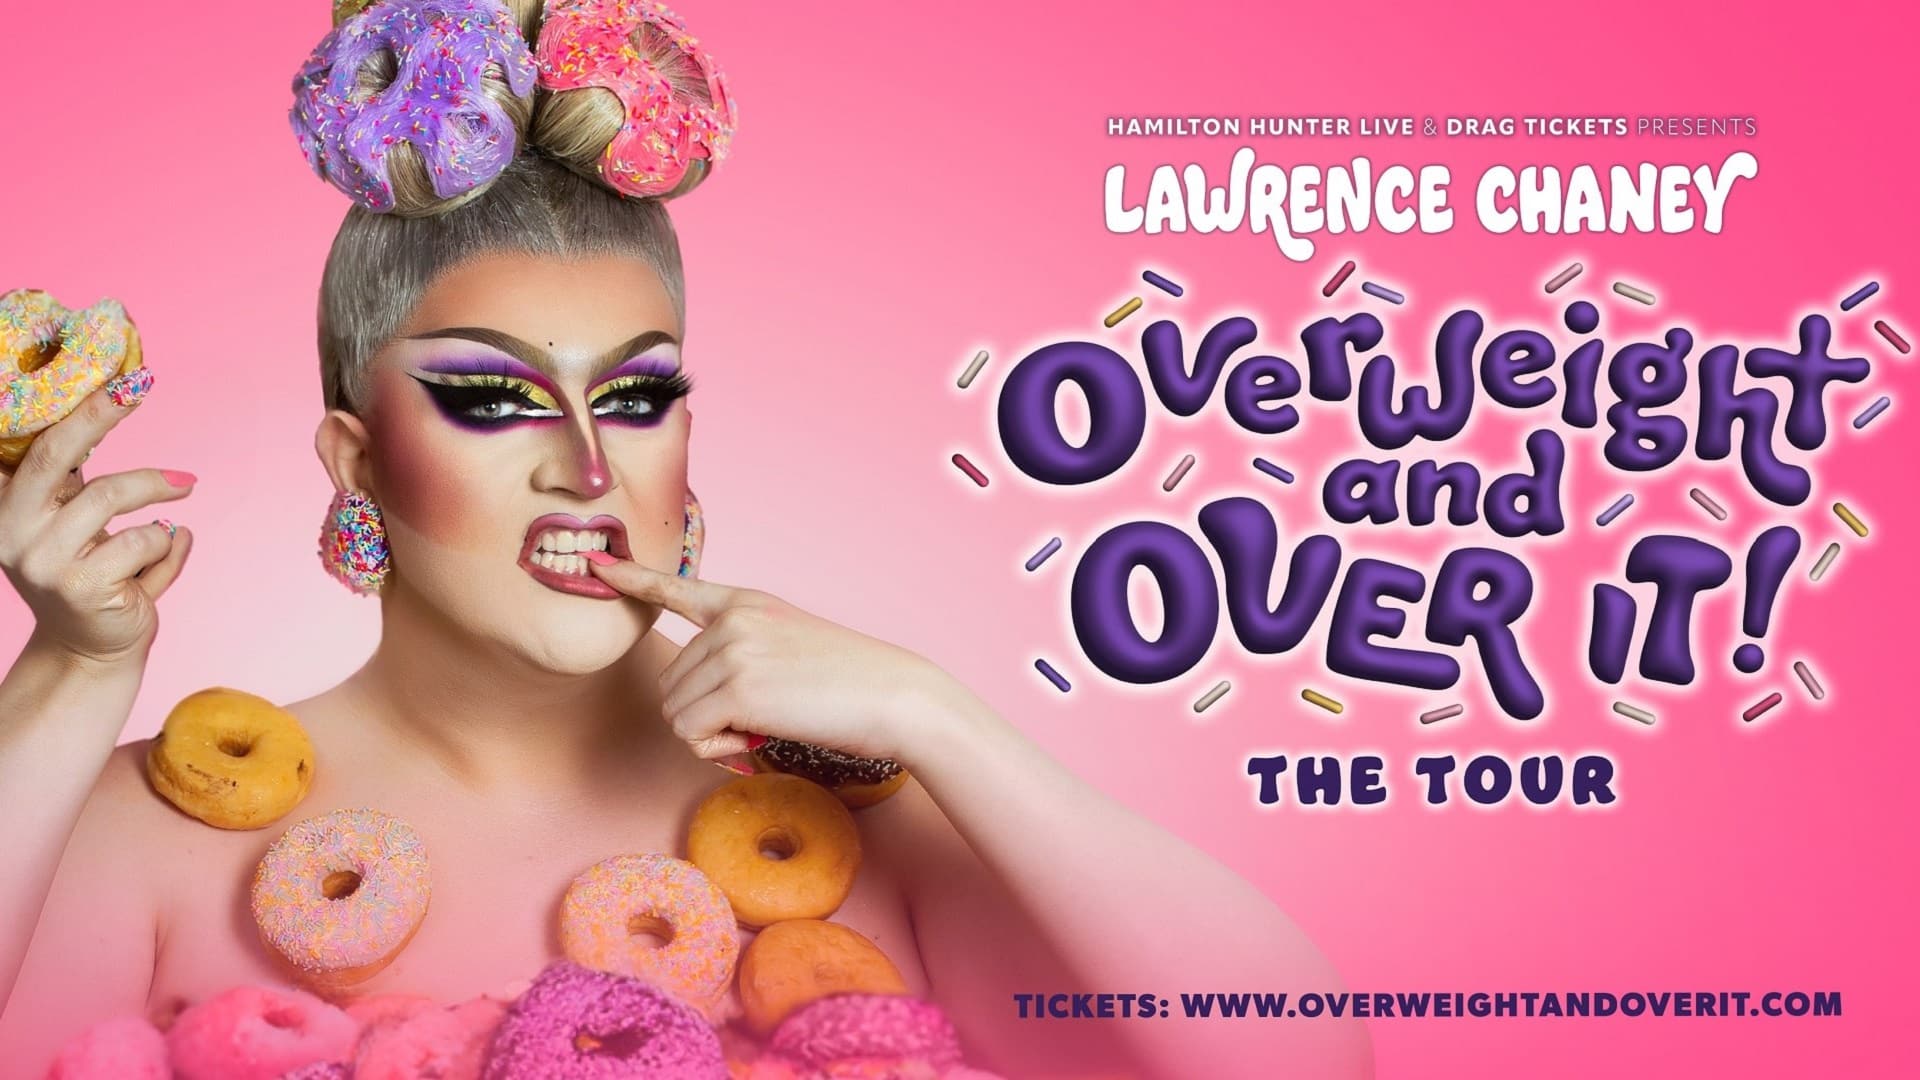 Lawrence Chaney dressed in drag. They wear colourful makeup, false nails and earrings that look like they're covered in icing sprinkles, space buns decorated to look like doughnuts and dress made our of doughnuts. The background is pink. In purple bubble style writing are the words: Hamilton Hunter Live and Drag Tickets present - Lawrence Chaney - Overweight and OVER IT! The Tour.